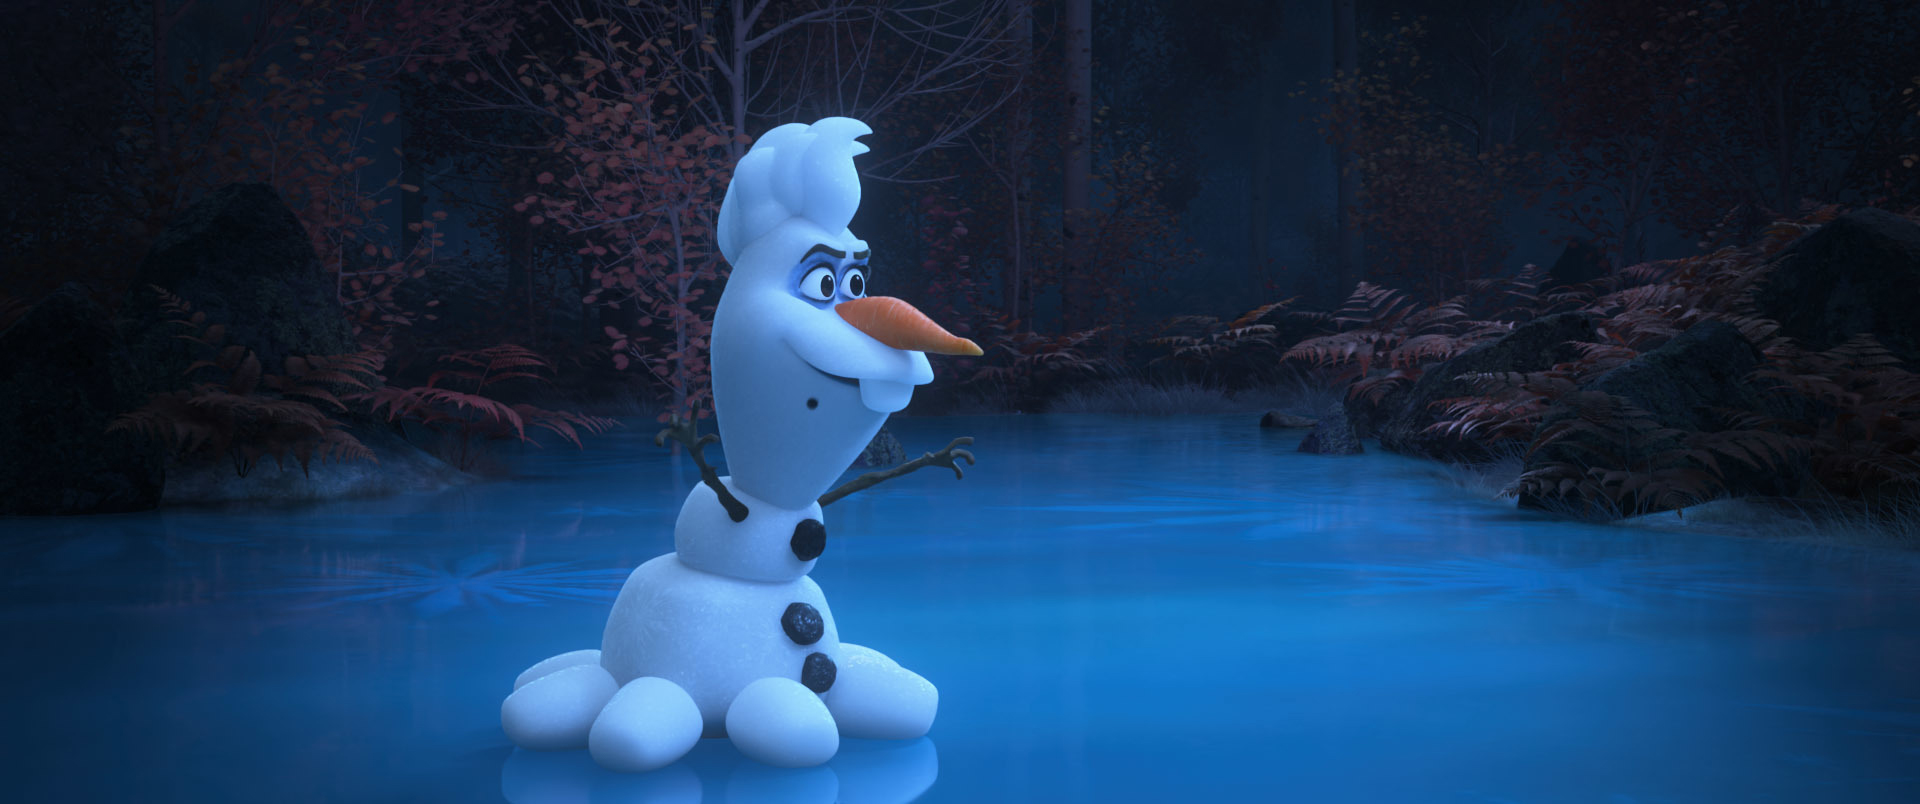 A scene from Olaf Presents on Disney Plus